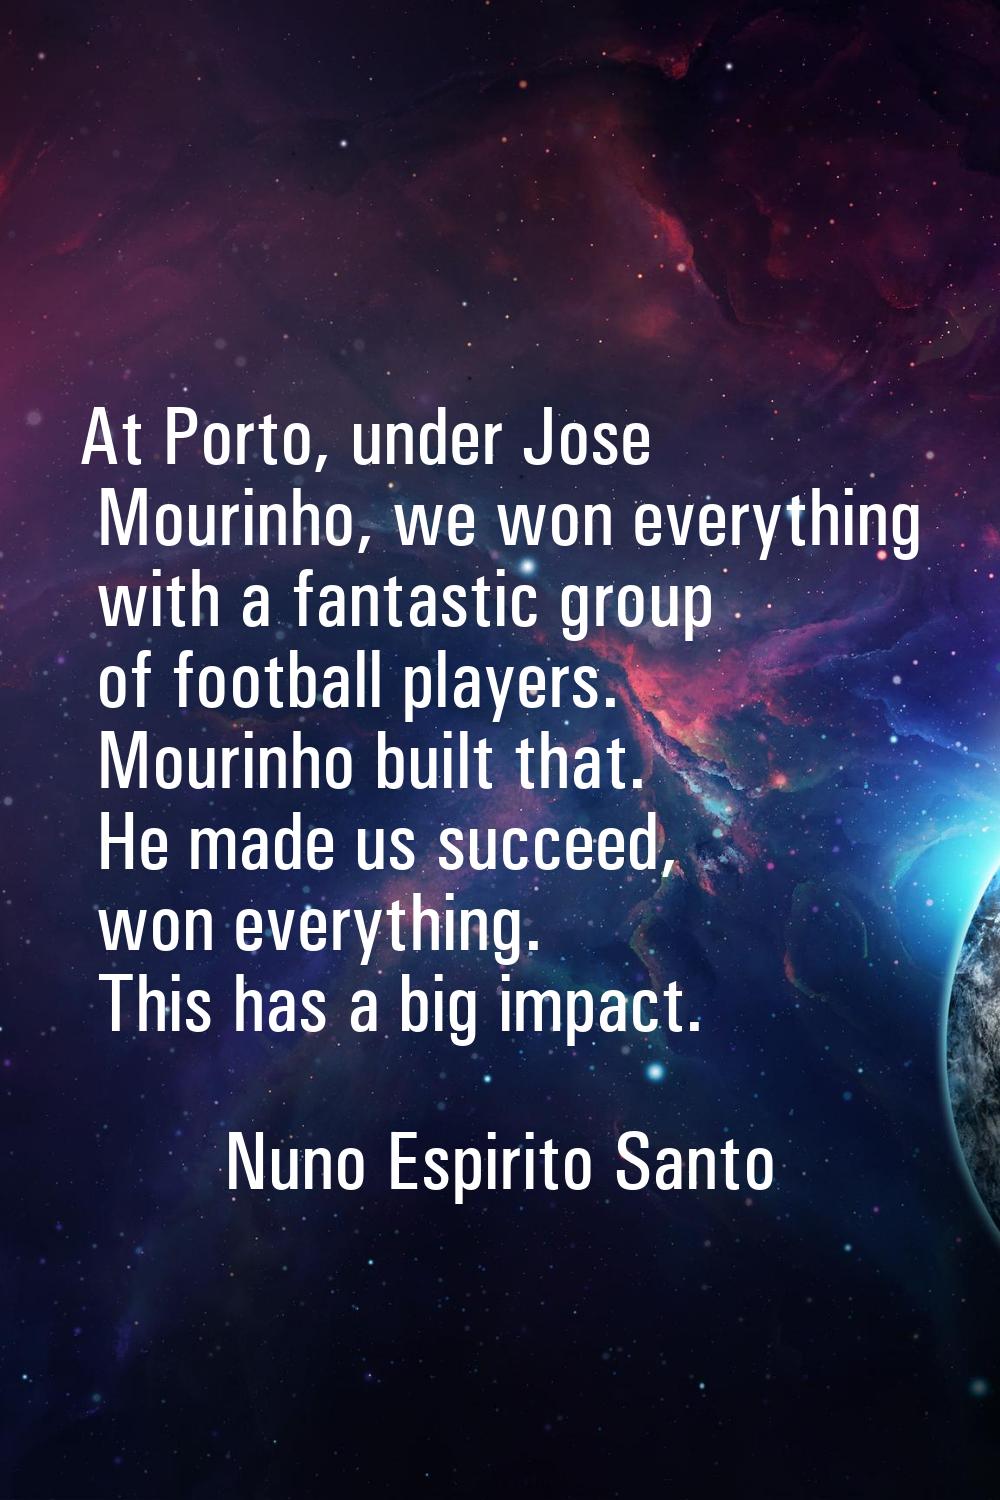 At Porto, under Jose Mourinho, we won everything with a fantastic group of football players. Mourin